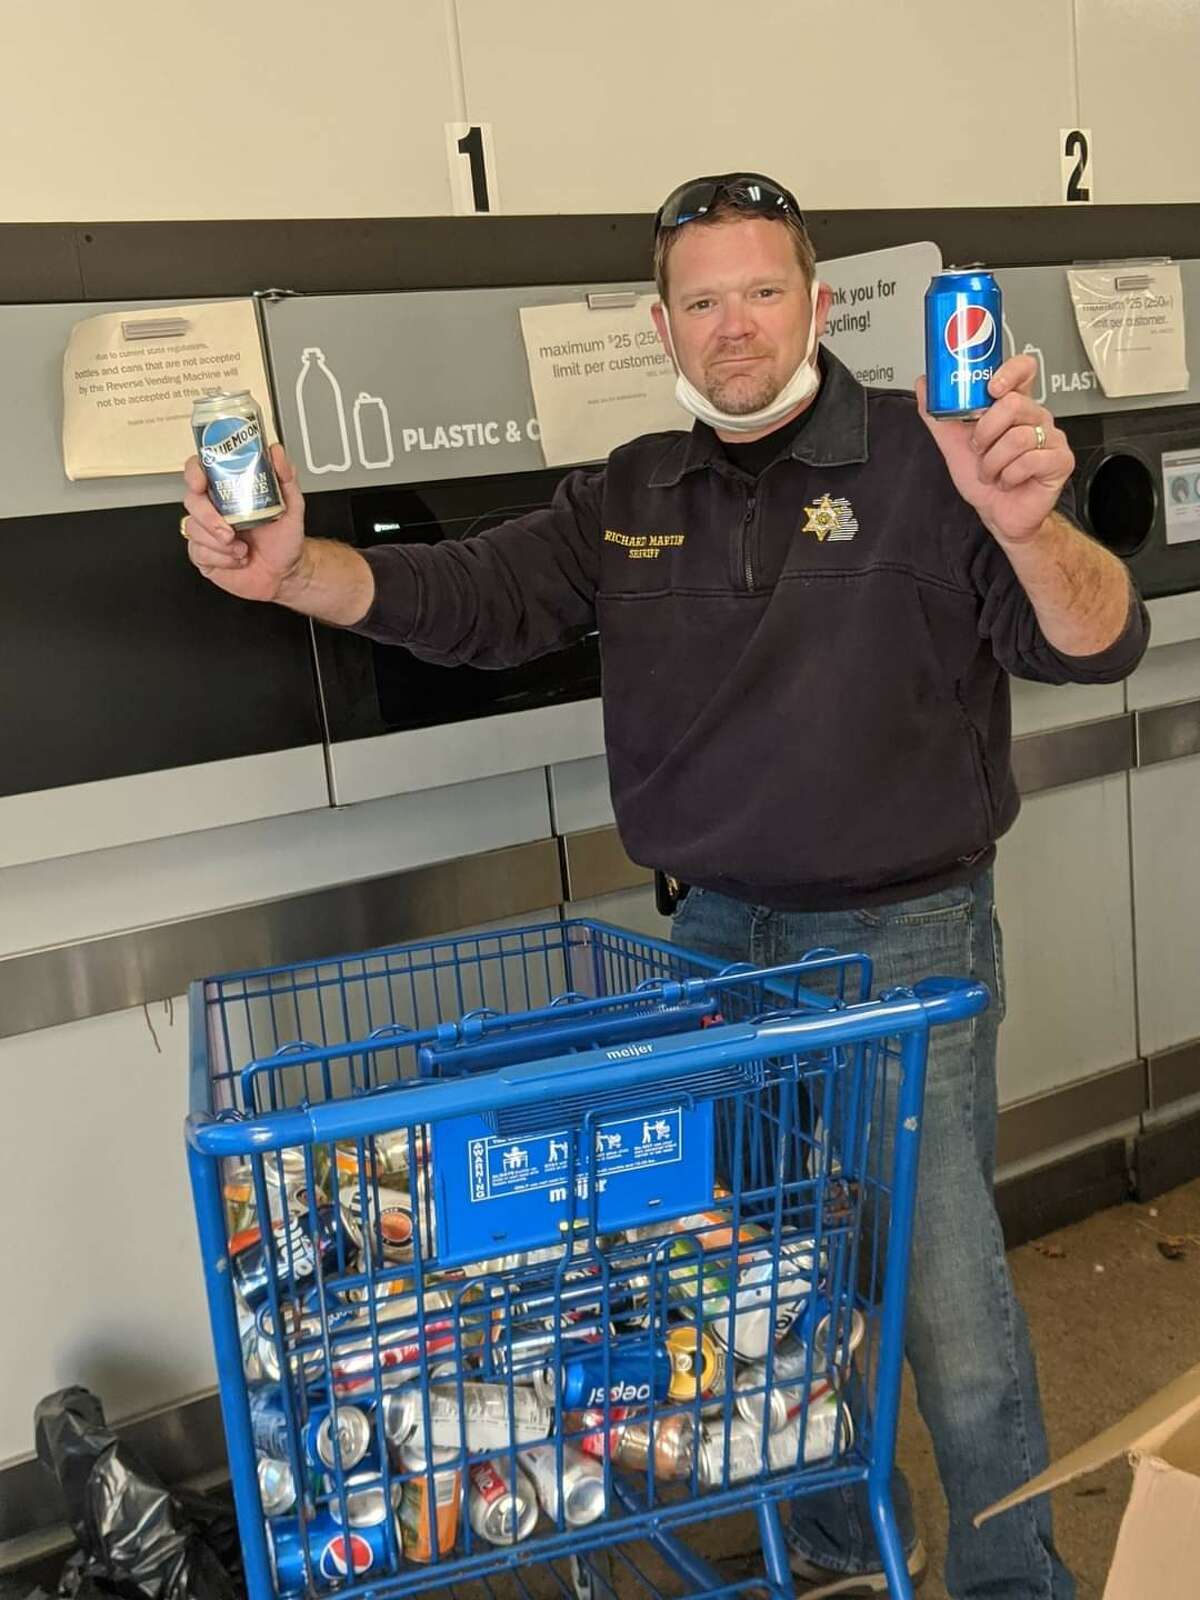 The Lake County Sheriff's Office will be picking up donations of cans and bottles to help support the LCSO Chritable Campaign, which supports local nonprofits. lake County Sheriff Rich Martin turns in donated cans and bottles.